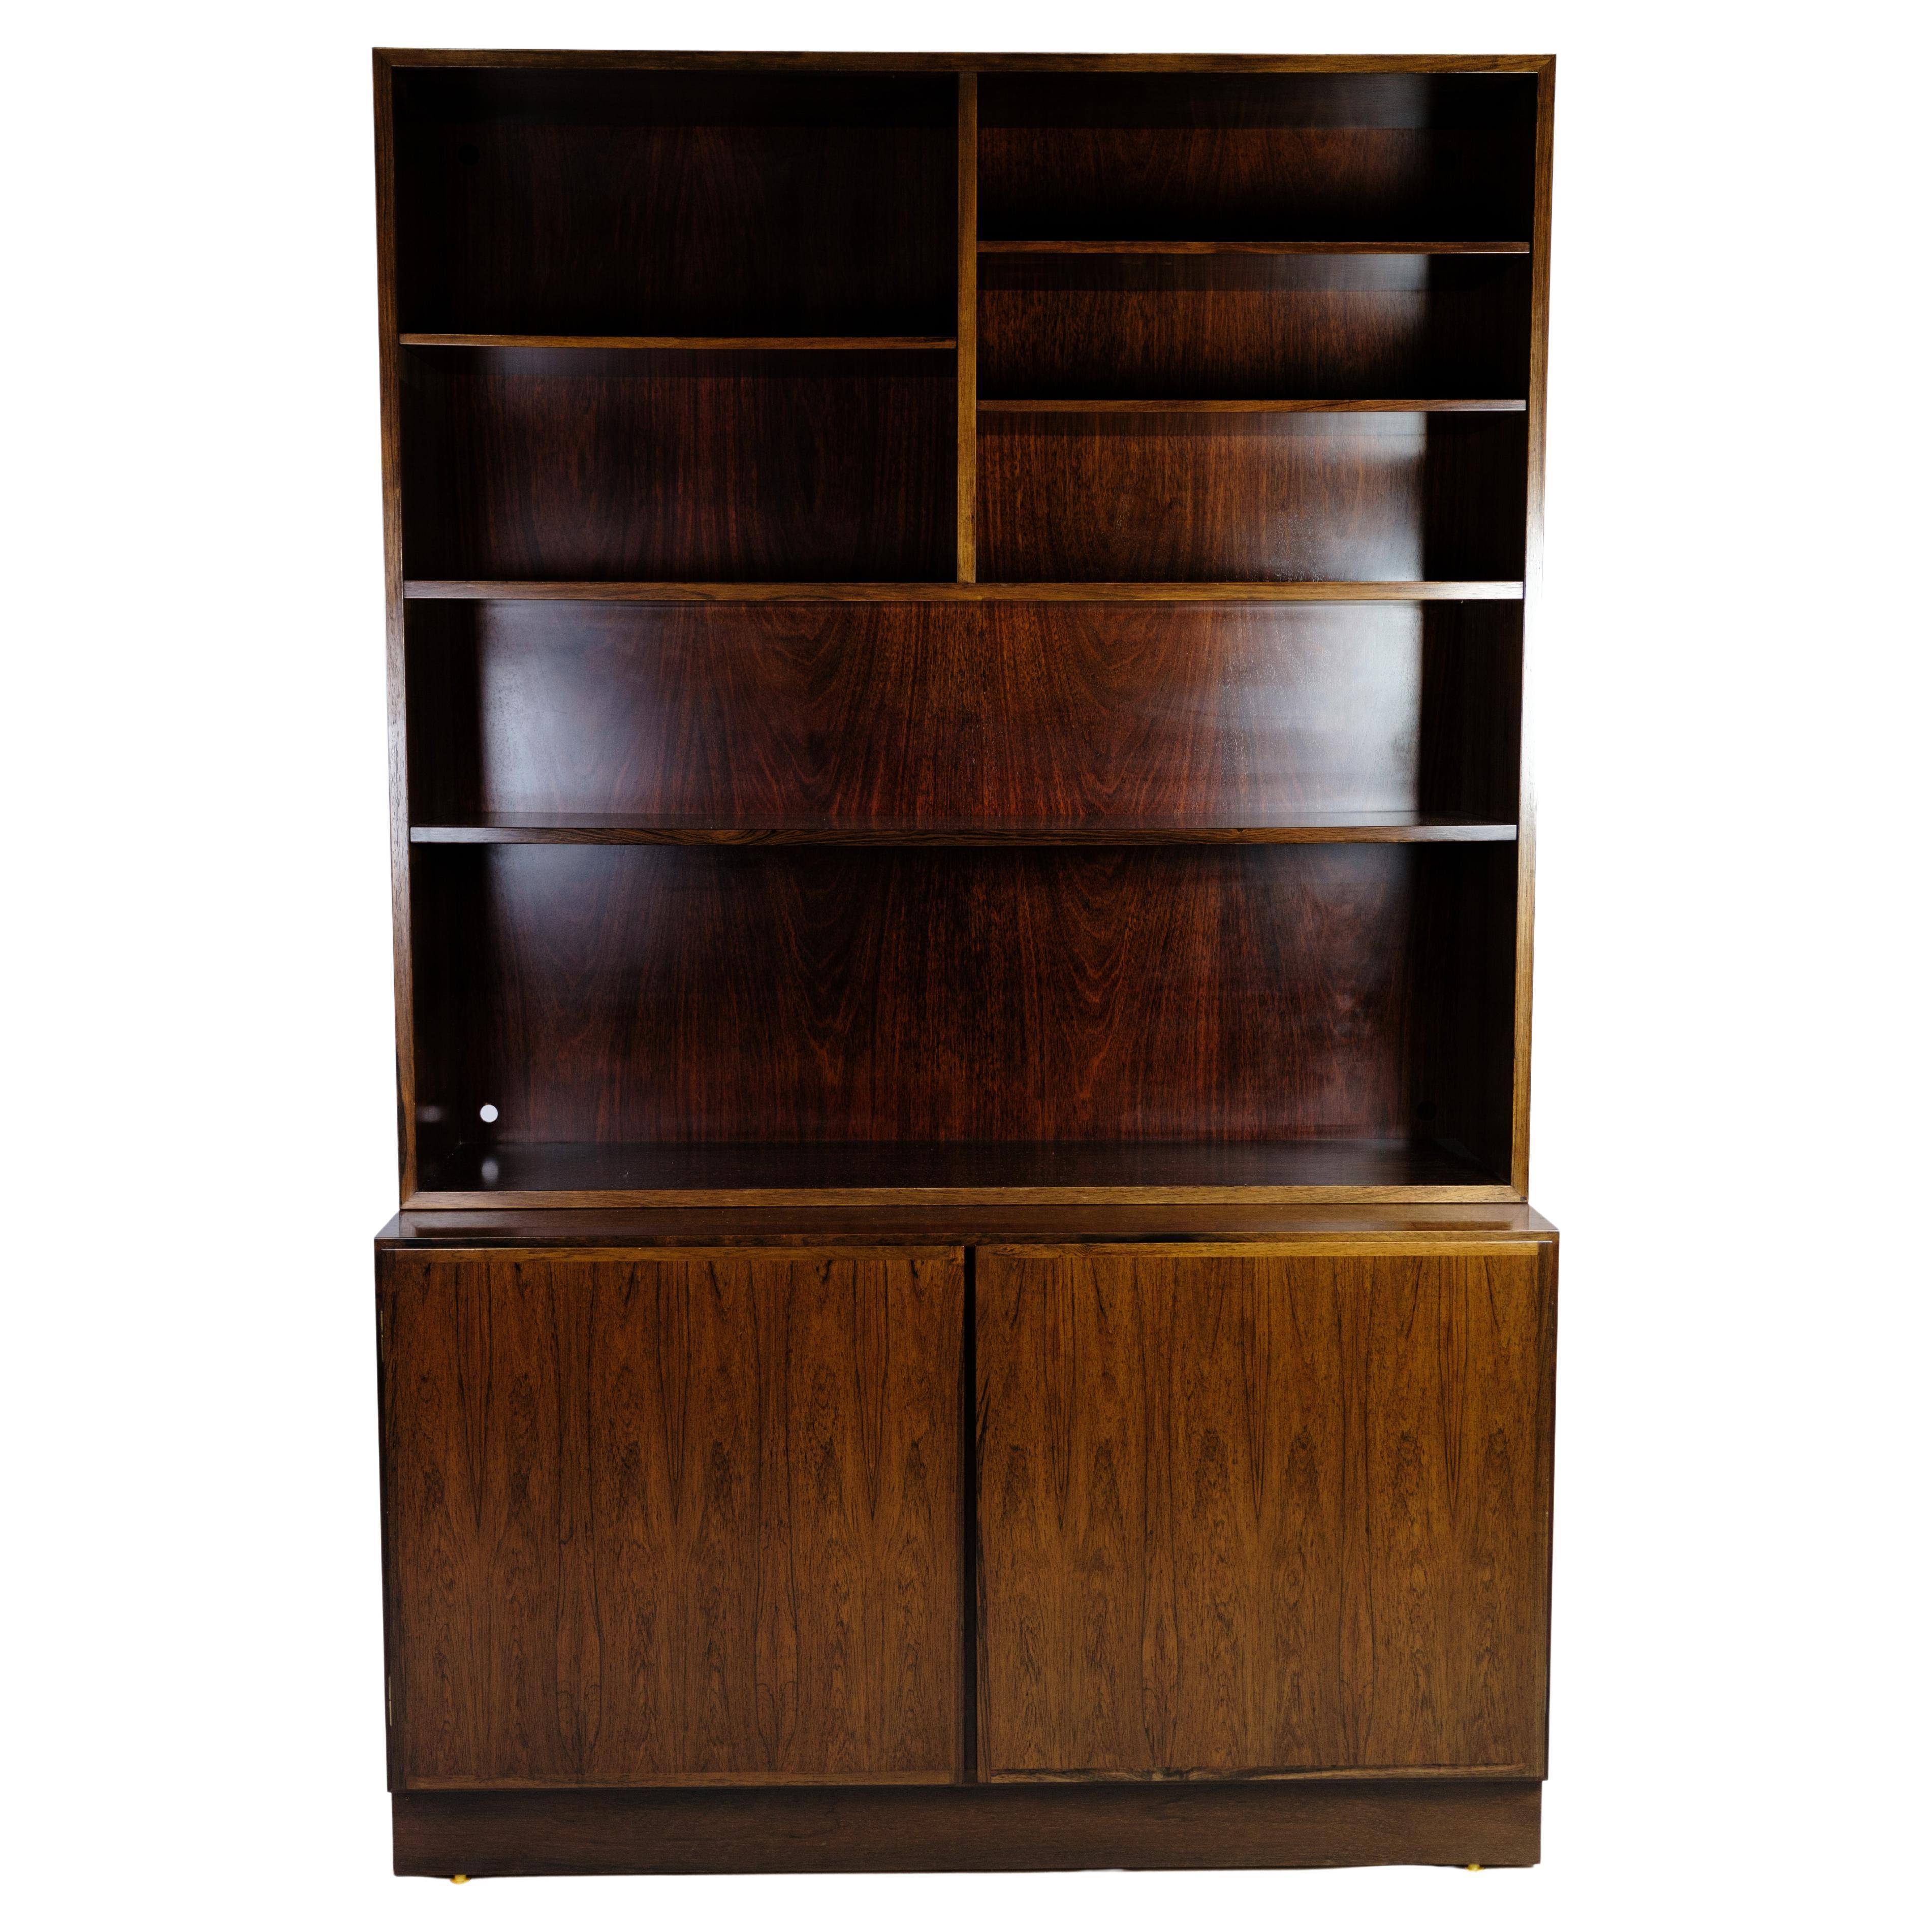 Shelving System Model 9 Made In Rosewood By Omann Juniors Møbelfabrik From 1960s For Sale